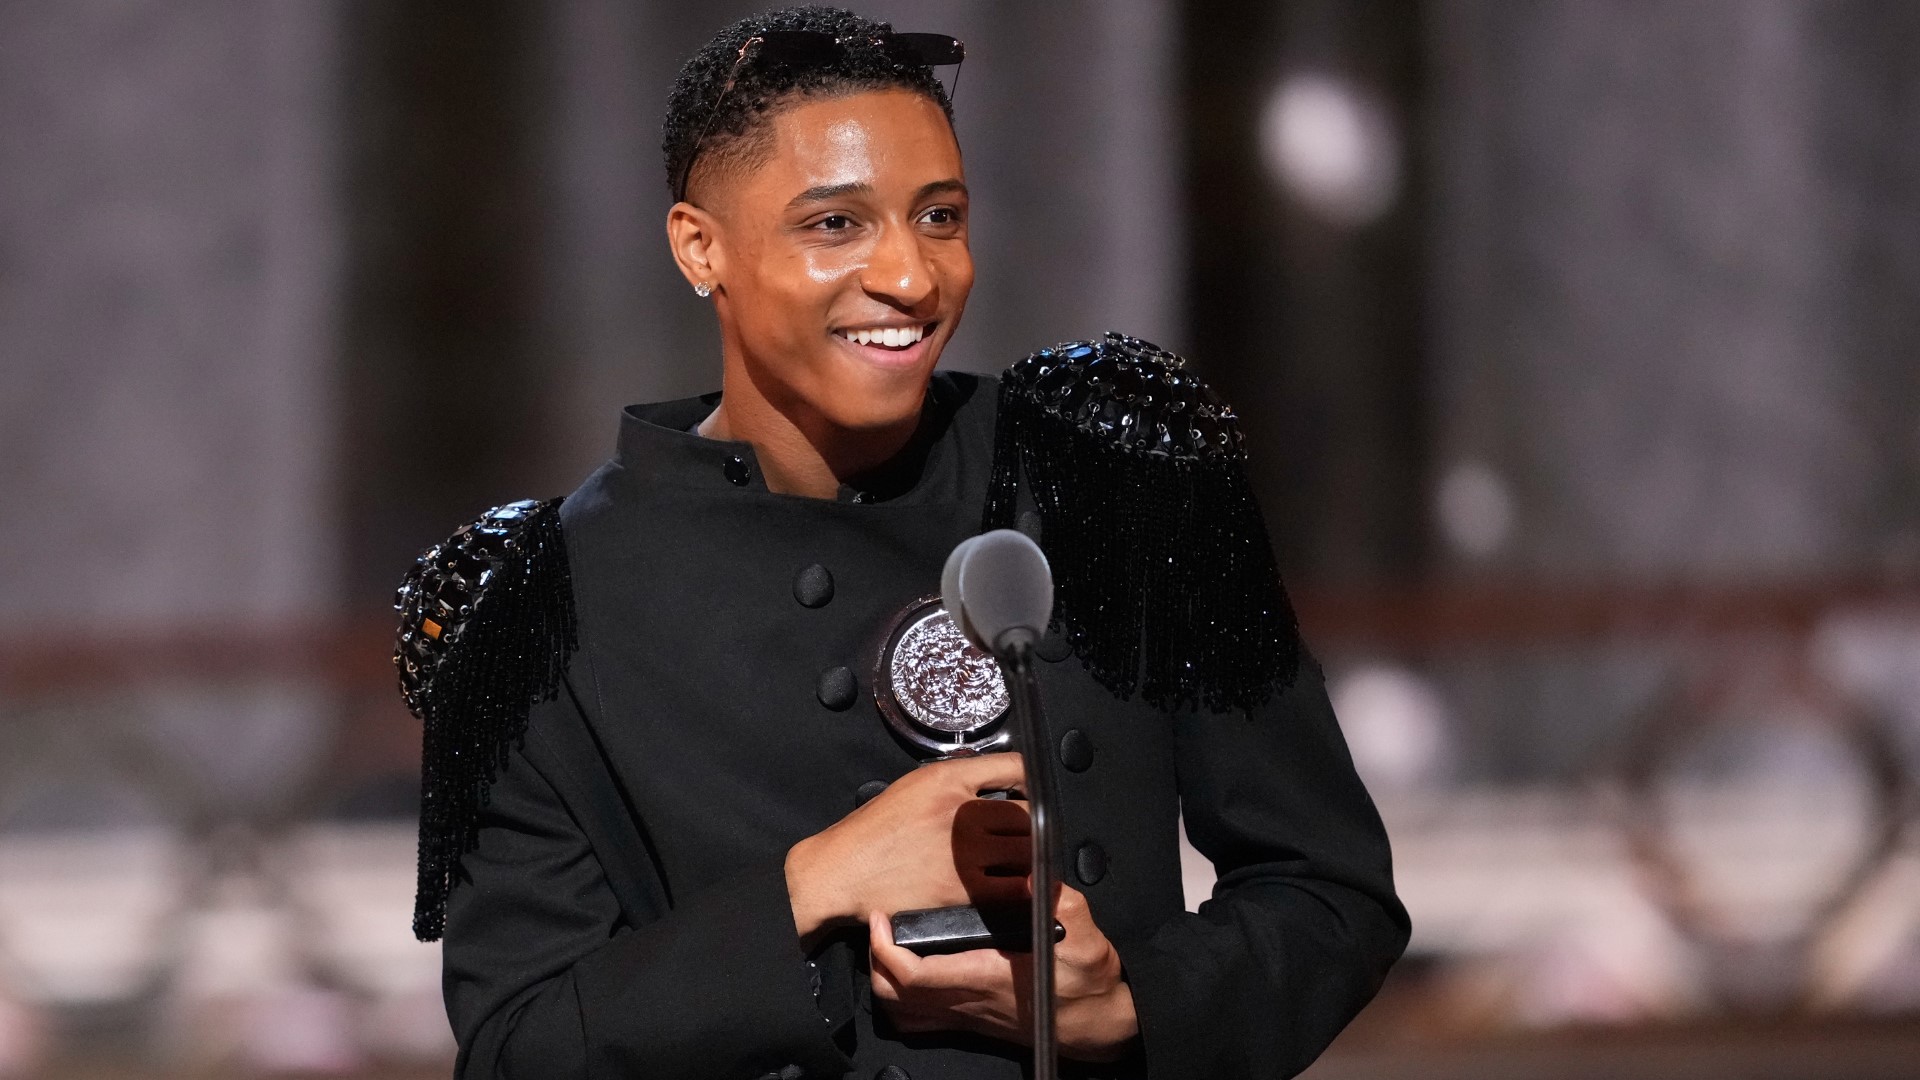 The Montgomery County native thanked his parents and sang during his acceptance speech. Hear from the Wootton grad's mentors and advisers from Bowie State.